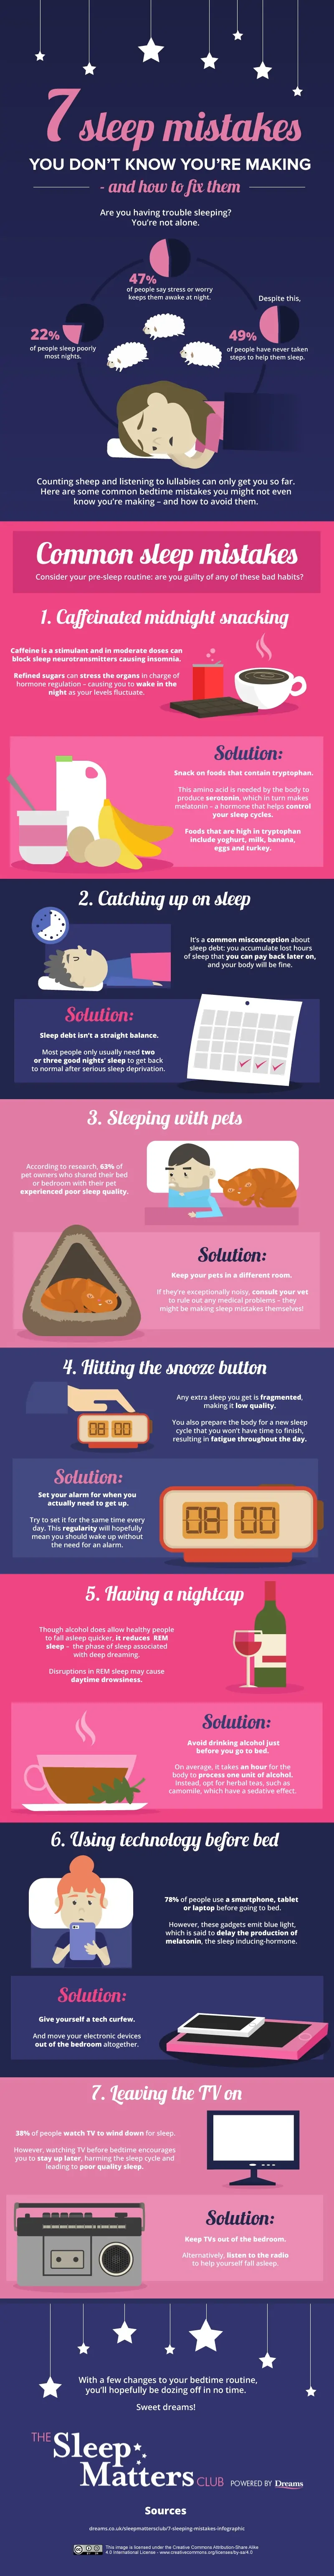 7 Sleep Mistakes You Don't Know You're Making and How to Fix Them: An Infographic from the Sleep Matters Club